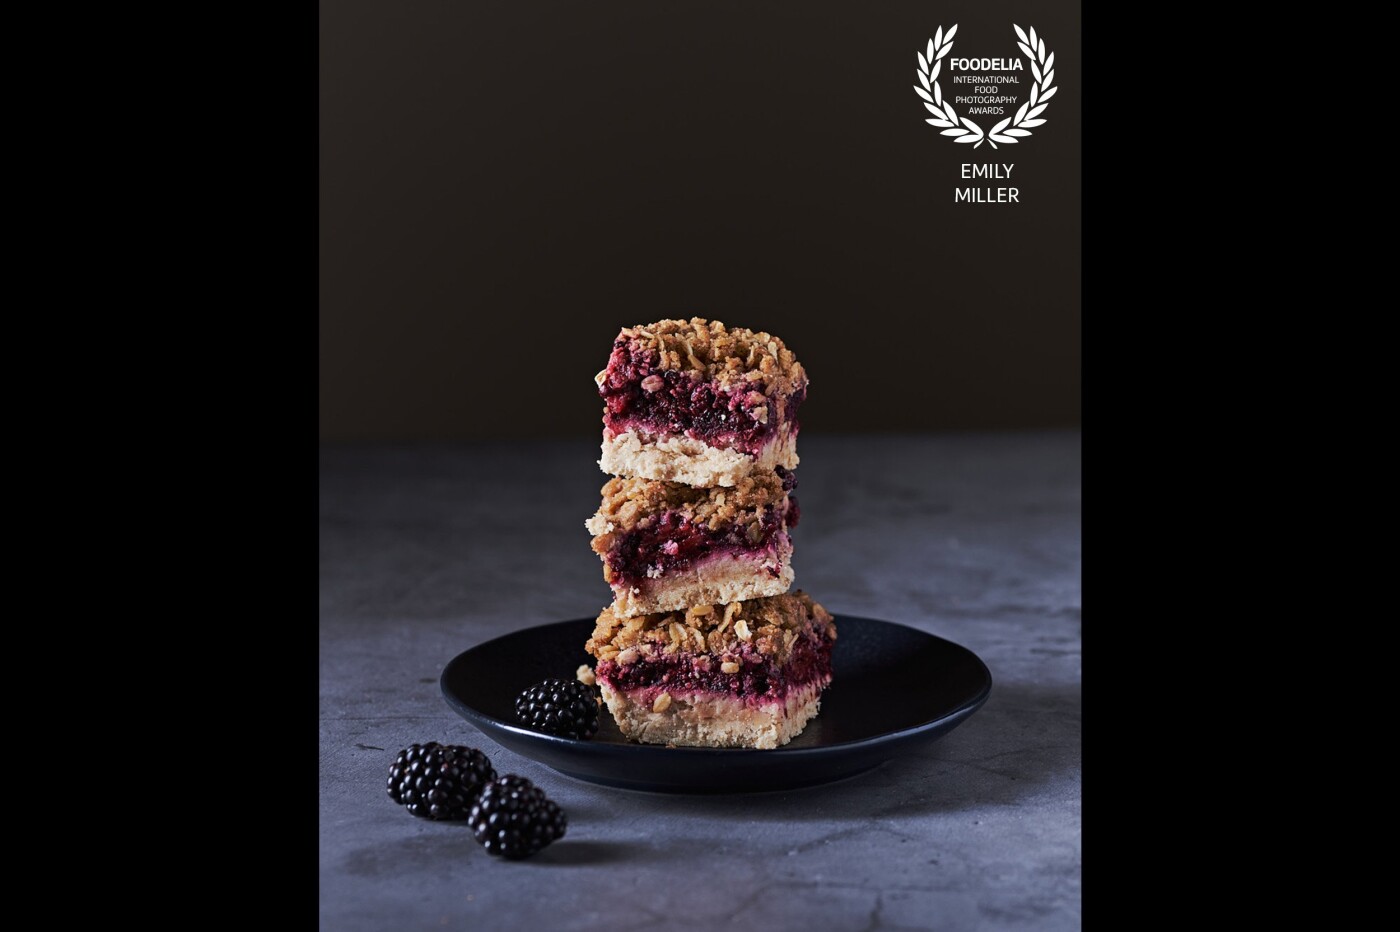 I was inspired to photograph a moody yet vibrant shot of the blackberry crumble bars I made. I stacked them for additional visual interest. To heighten the moodiness and drama I deepened the blacks when retouching.